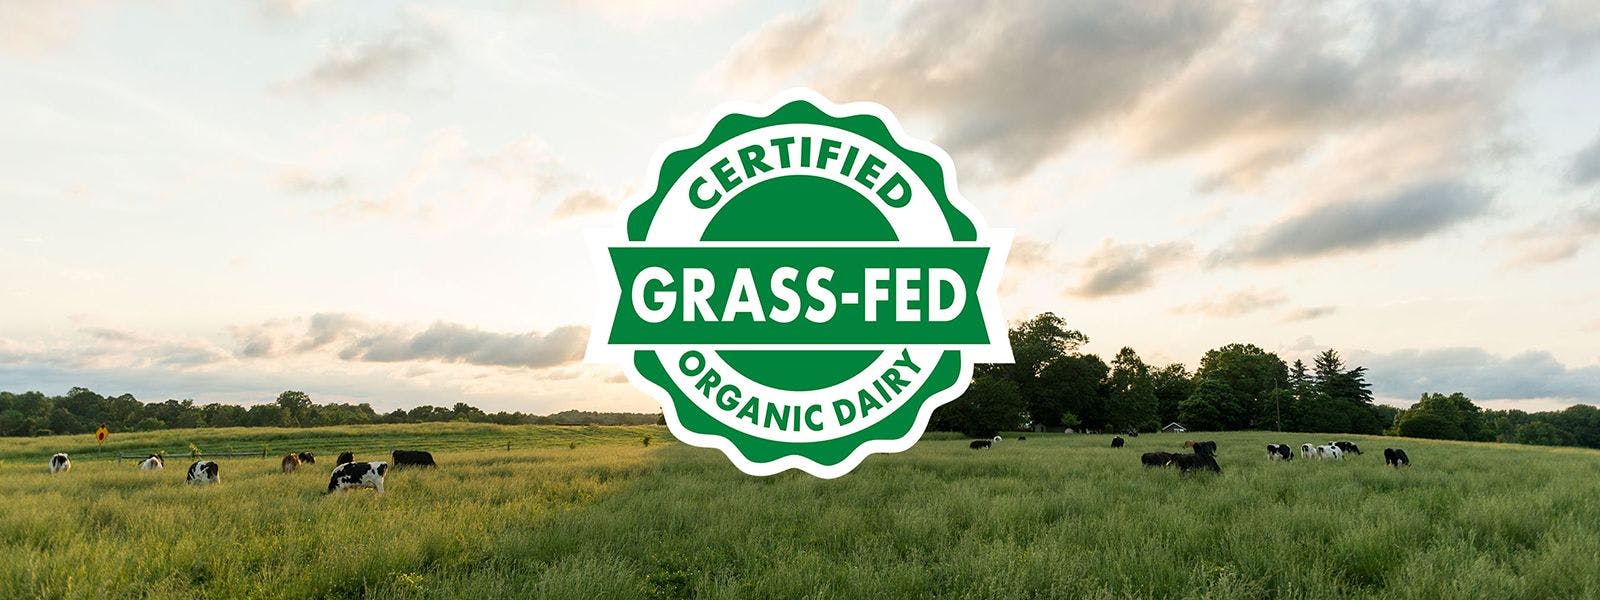 Certified Grass-fed Organic seal overlaid on an image of a green pasture.